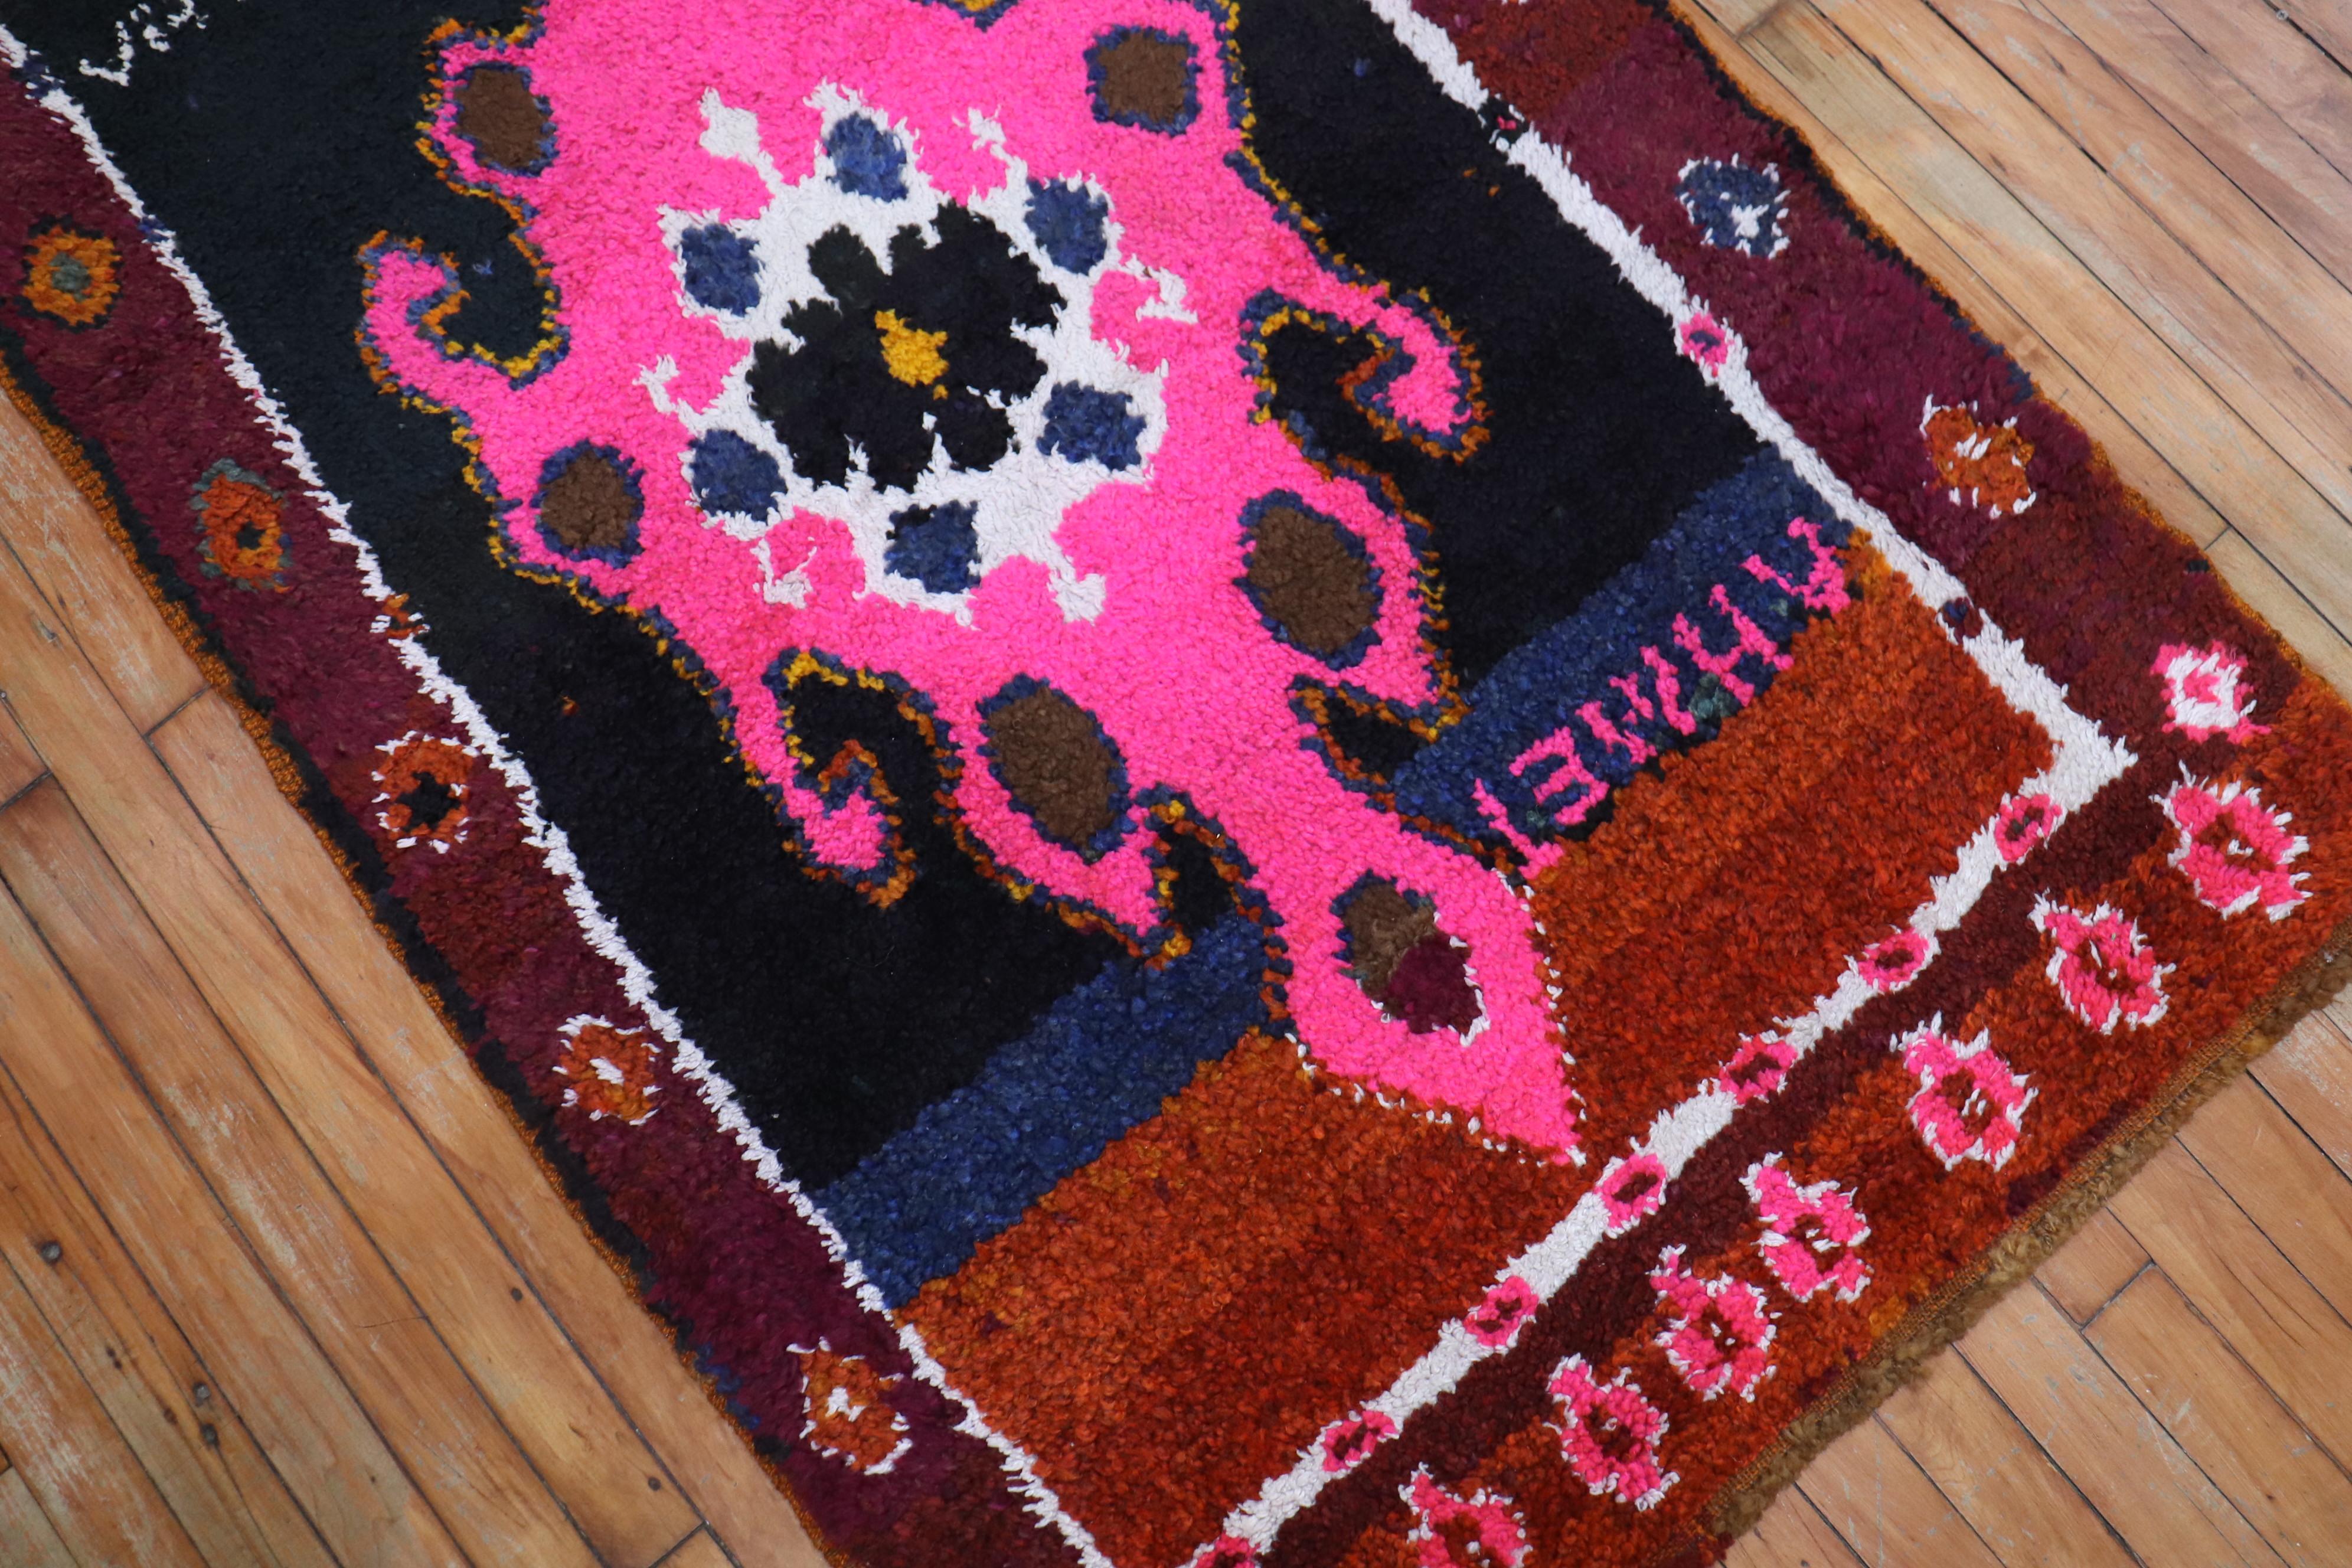 A long wool pile Turkish runner with saturated colors featuring an intense pink color we seldom find in vintage rugs. This piece must have been custom ordered due to the wild colors and it 2 Turkish names inscribed within the field

Measures: 3'3”